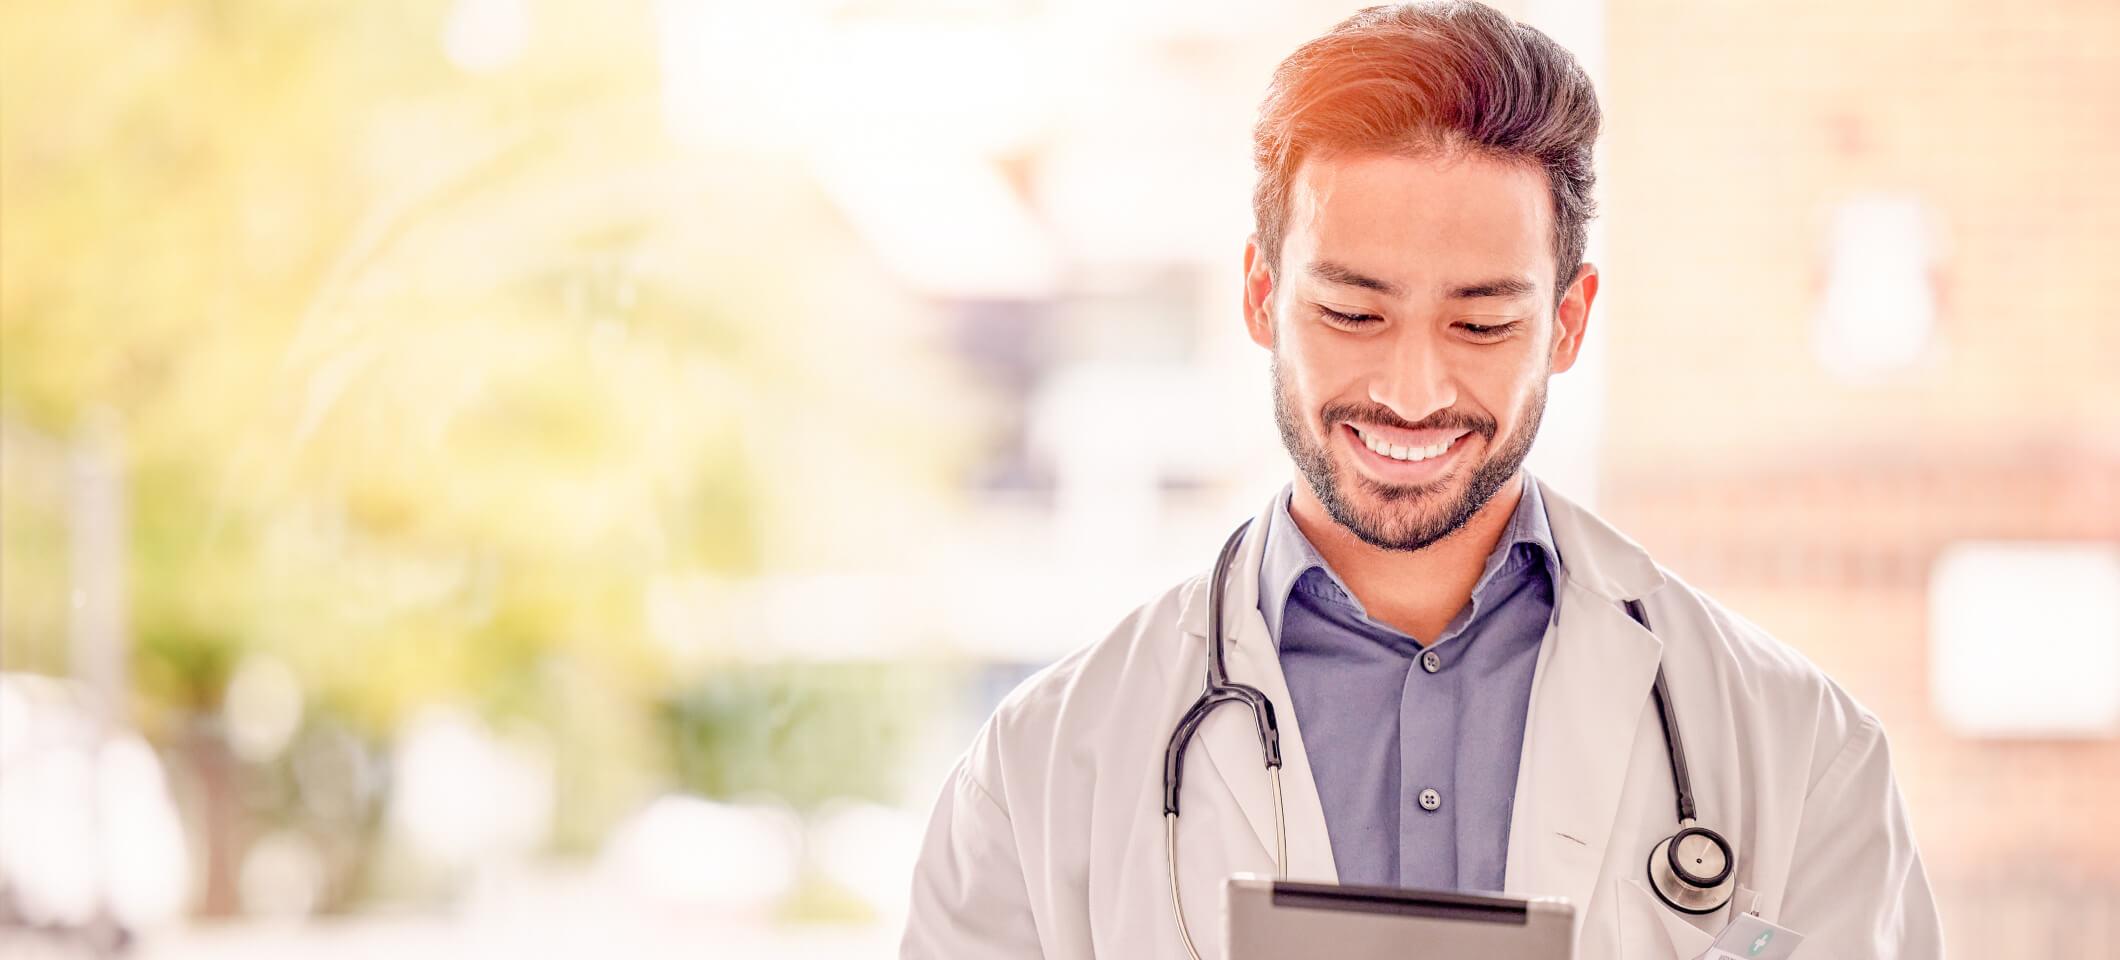 Physician smiles while holding tablet looking for healthcare thought leaders to follow on social media